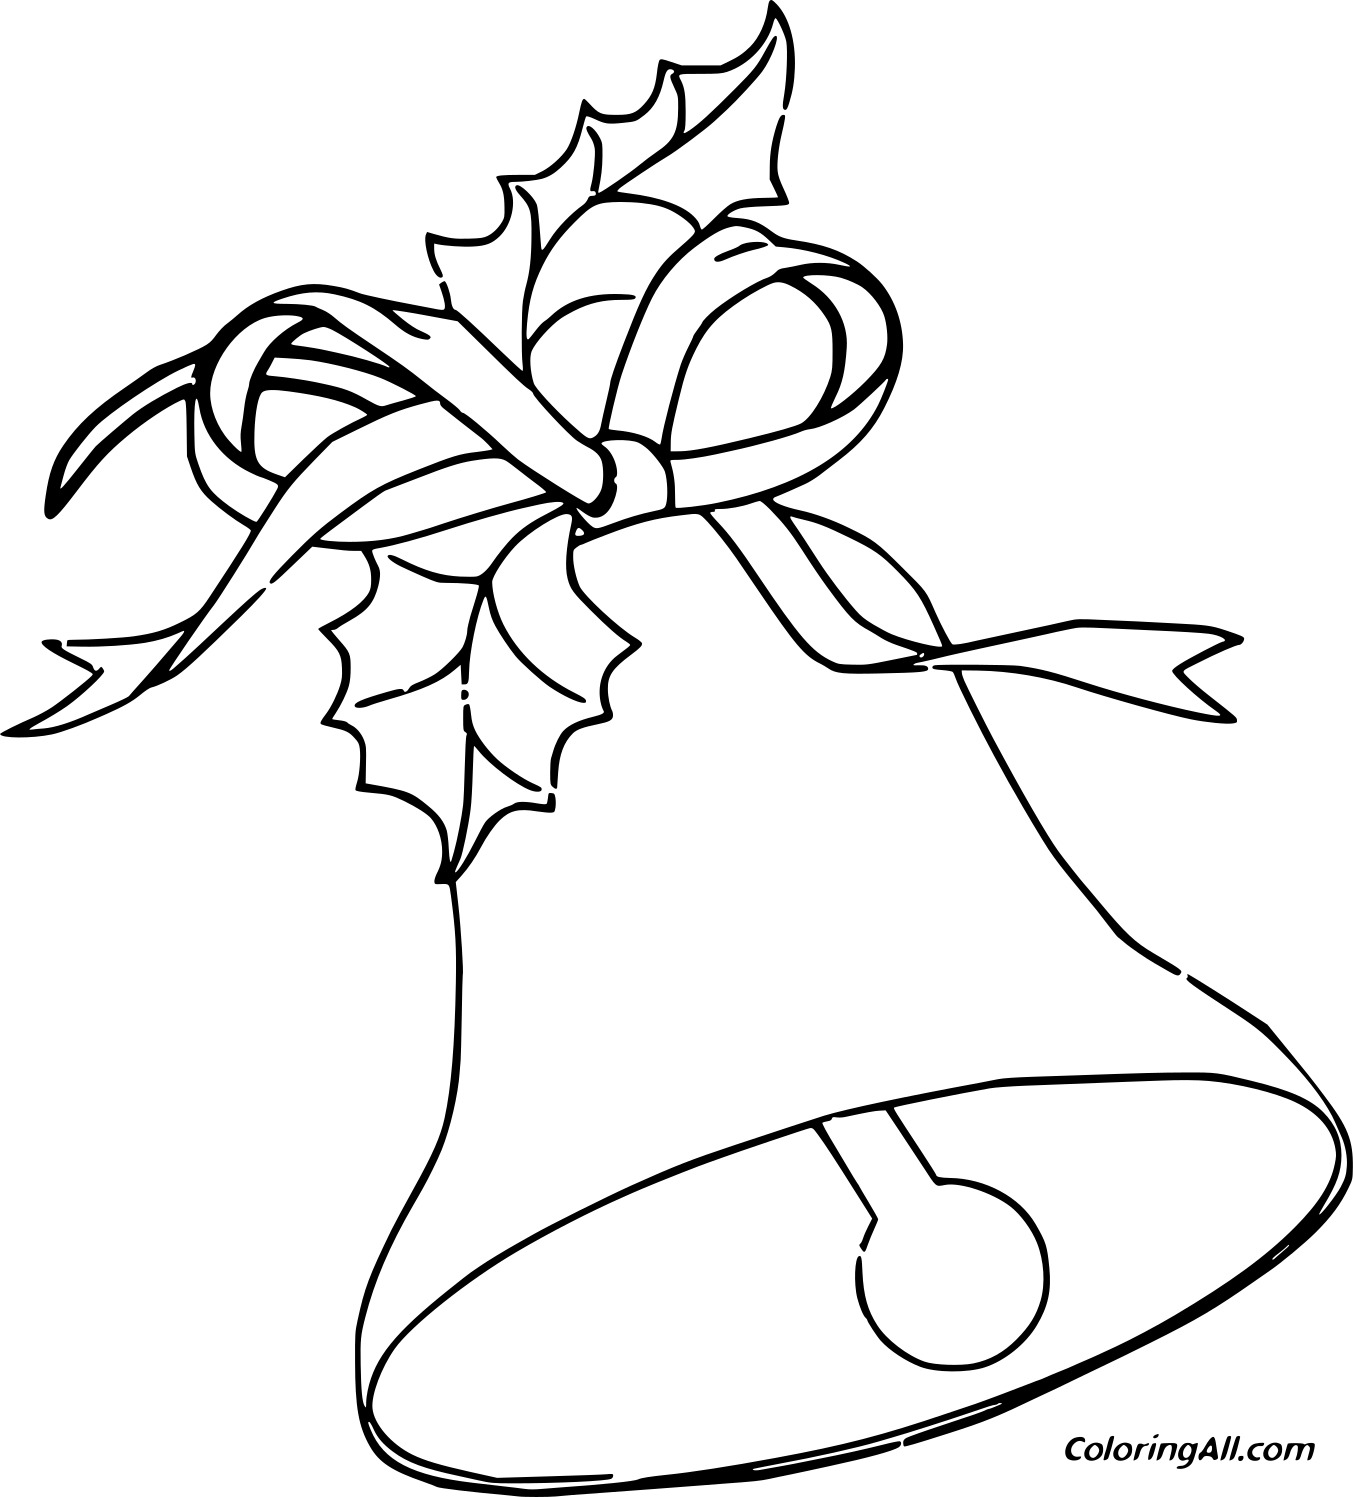 Simple Christmas Bell Image For Kids Coloring Page